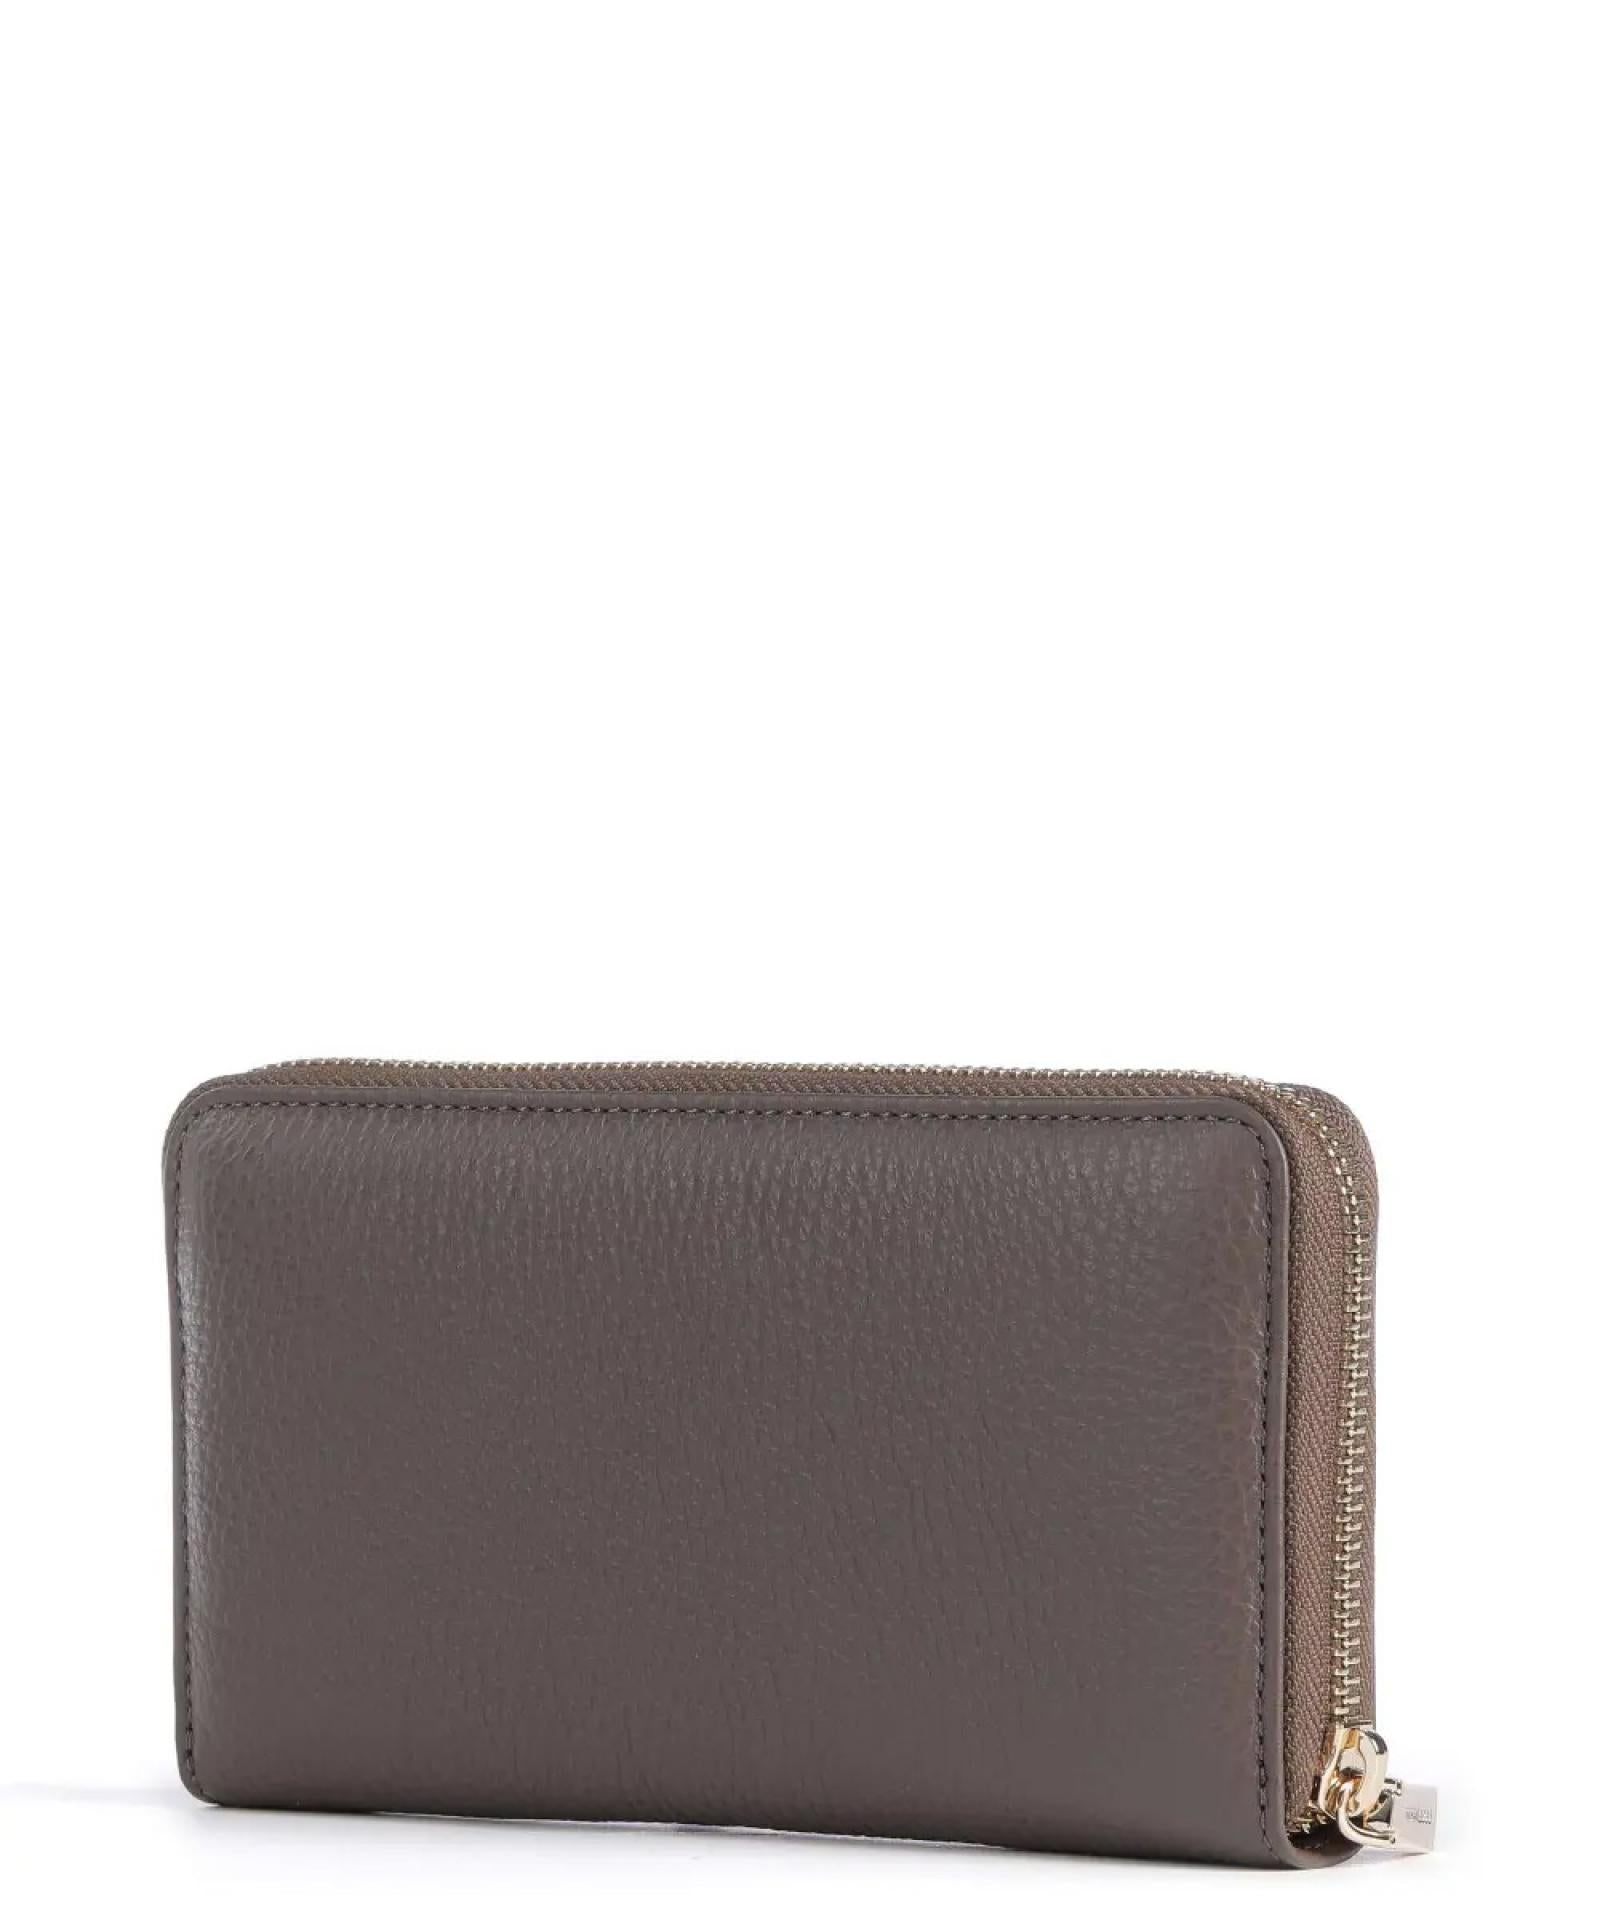 Coccinelle WALLET GRAINED LEATHER / COFFEE